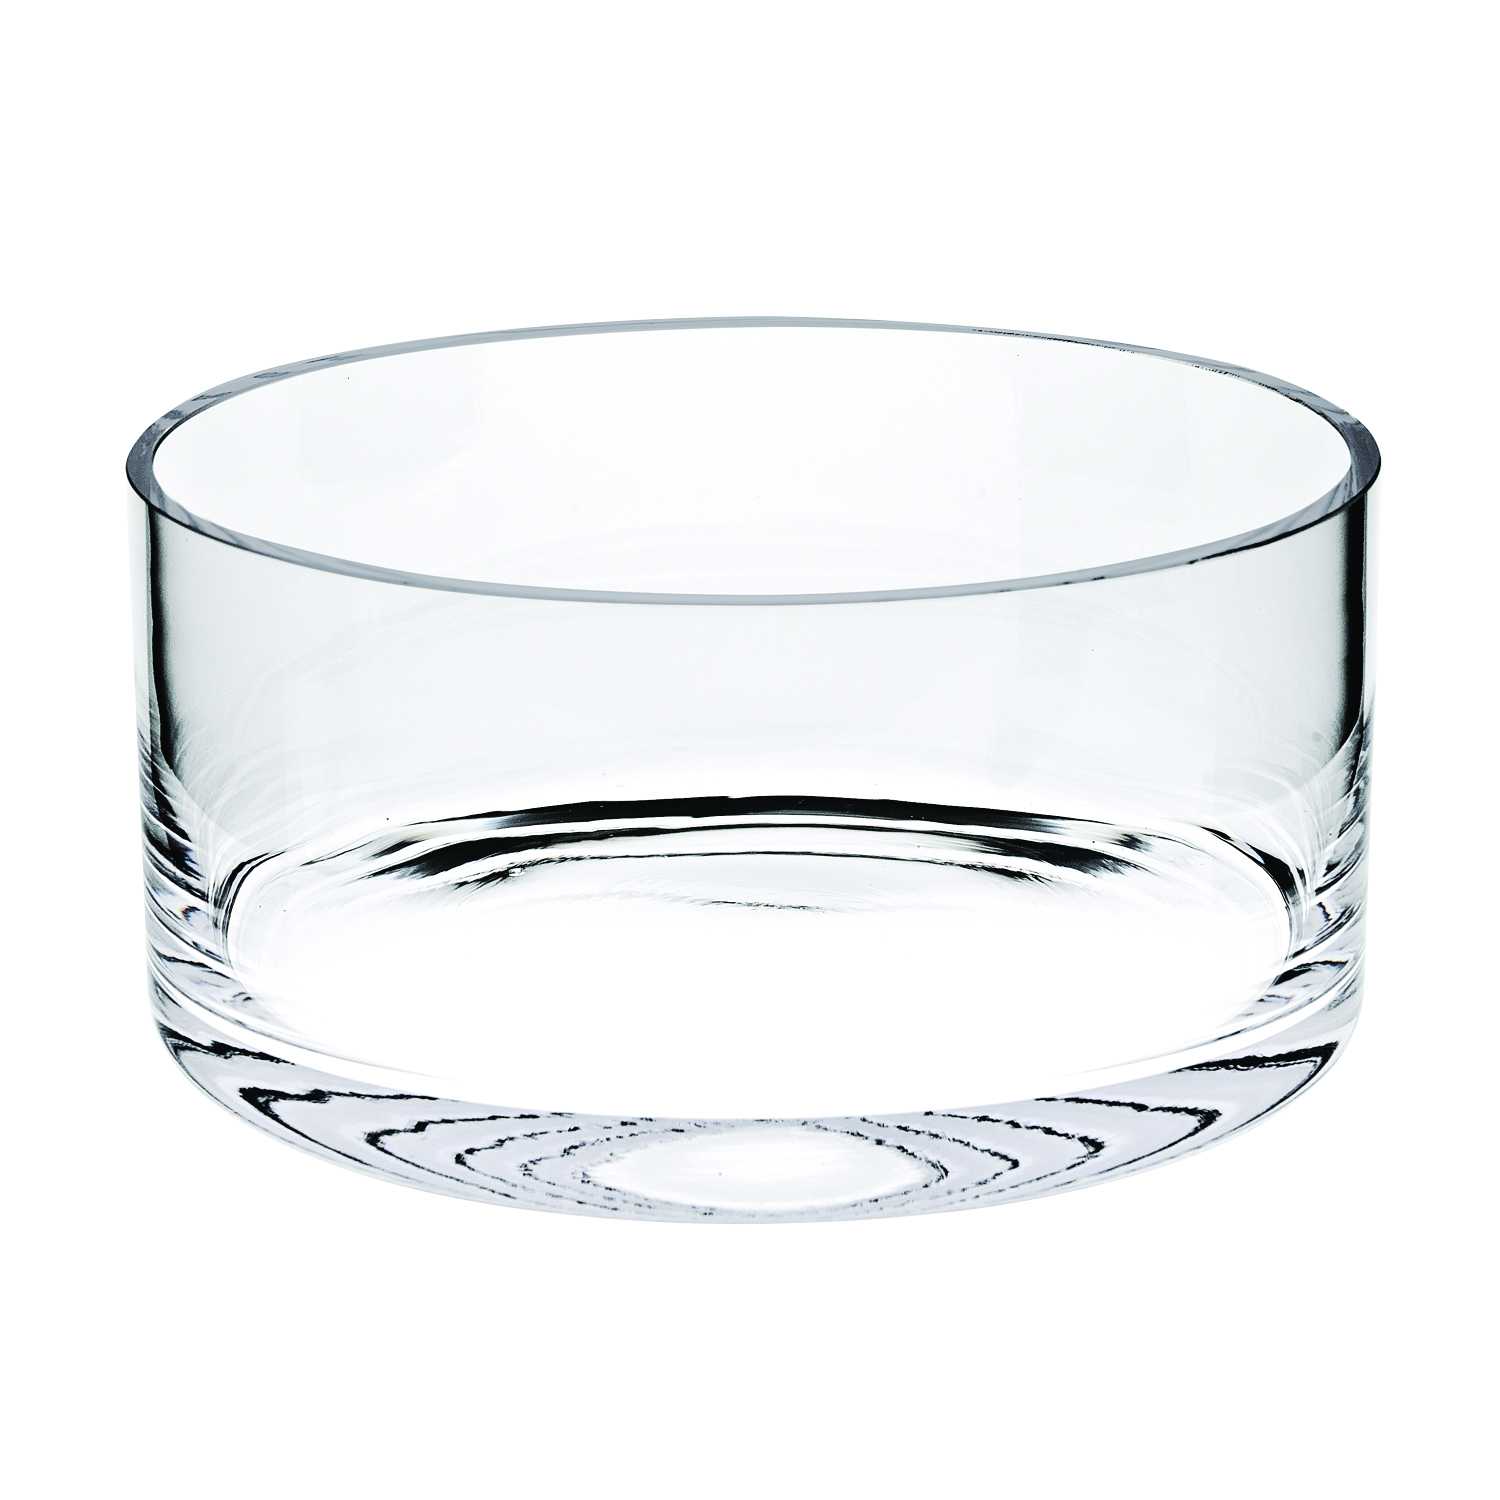 5.5" Mouth Blown Crystal All Purpose Lead Free Bowl-375719-1